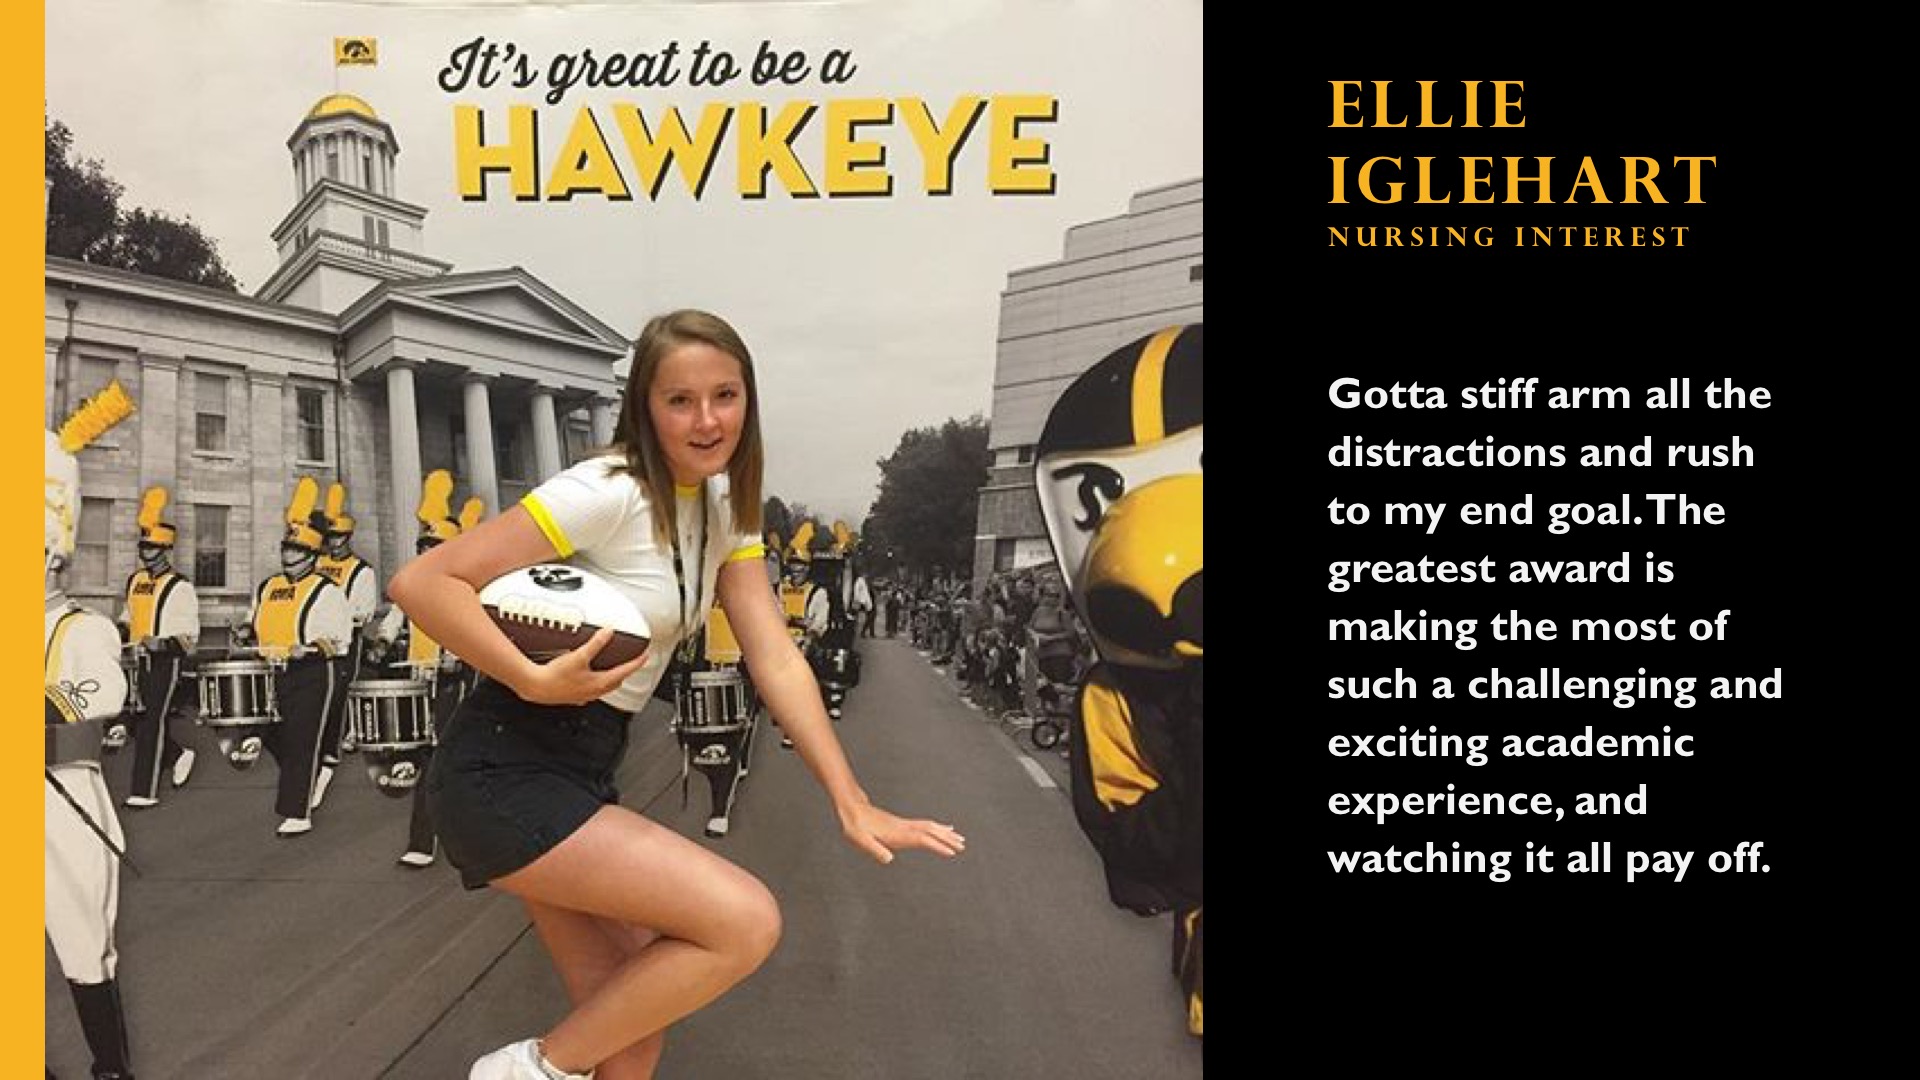 Ellie Iglehart. Nursing Interest. Gotta stiff arm all the distractions and rush to my end goal. The greatest award is making the most of such a challenging and exciting academic experience, and watching it all pay off.